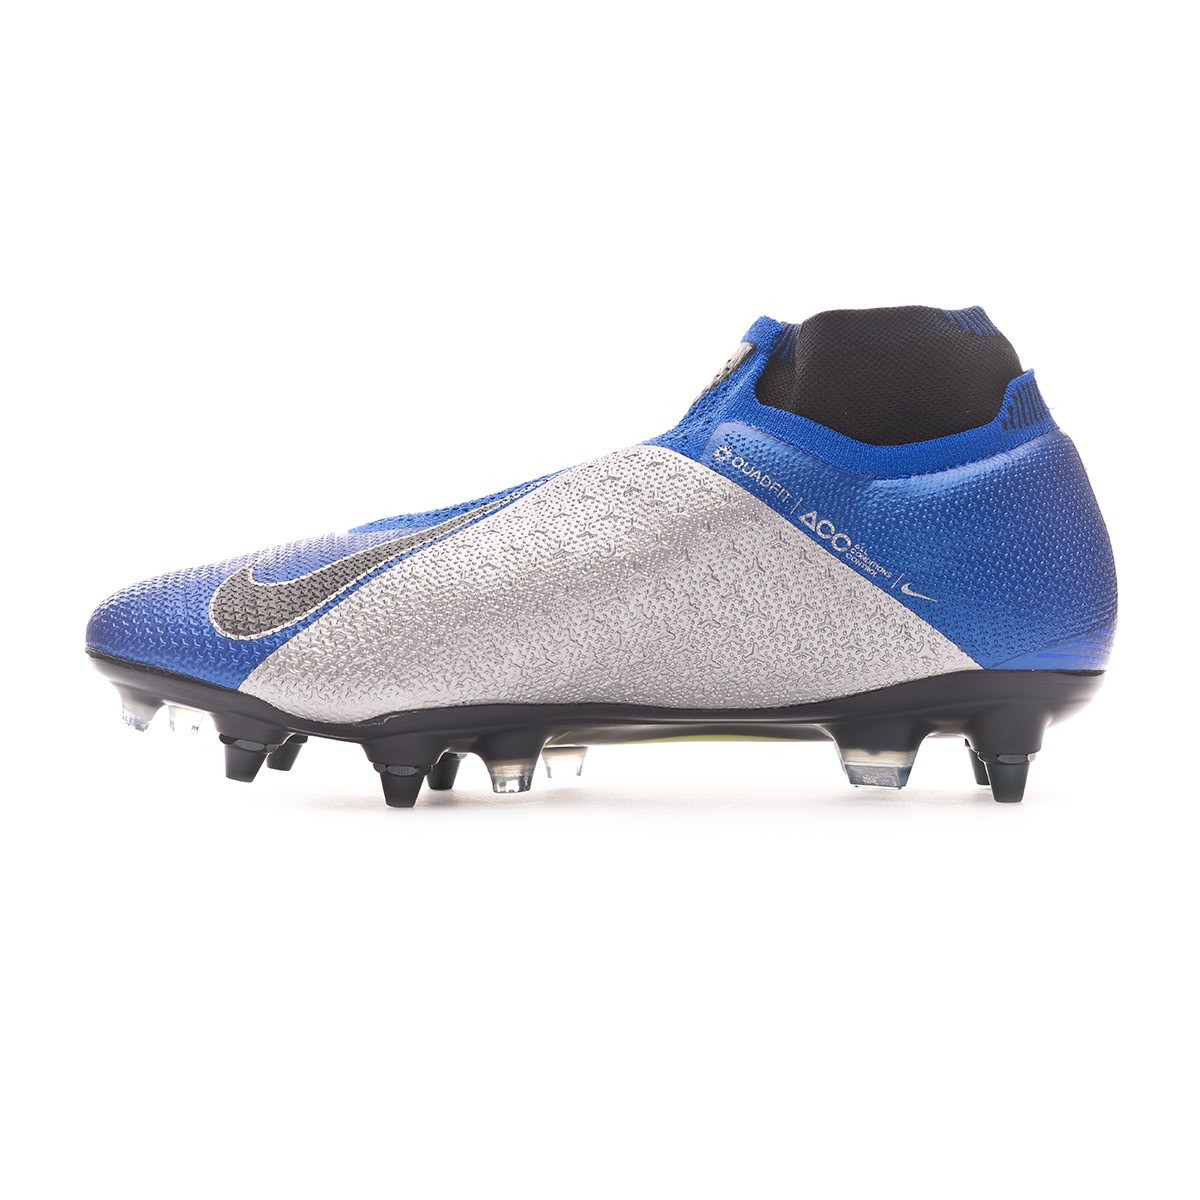 Buy Nike Phantom Vision Academy Dynamic Fit MG Only .